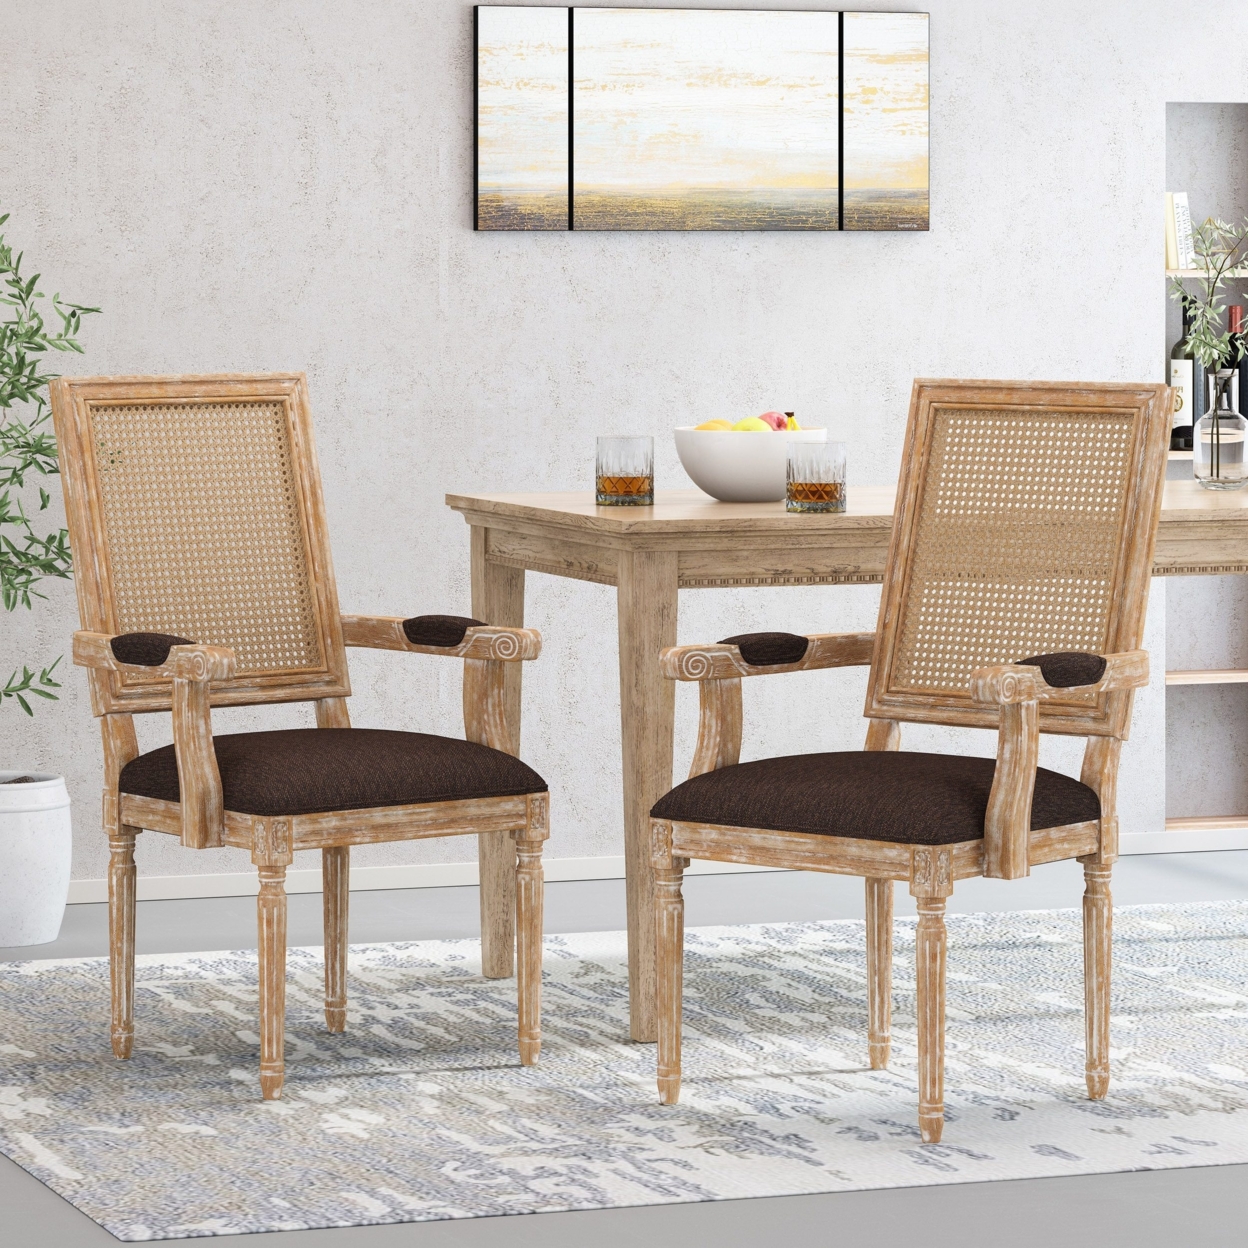 Zentner French Country Wood And Cane Upholstered Dining Chair - Natural/brown, Set Of 6